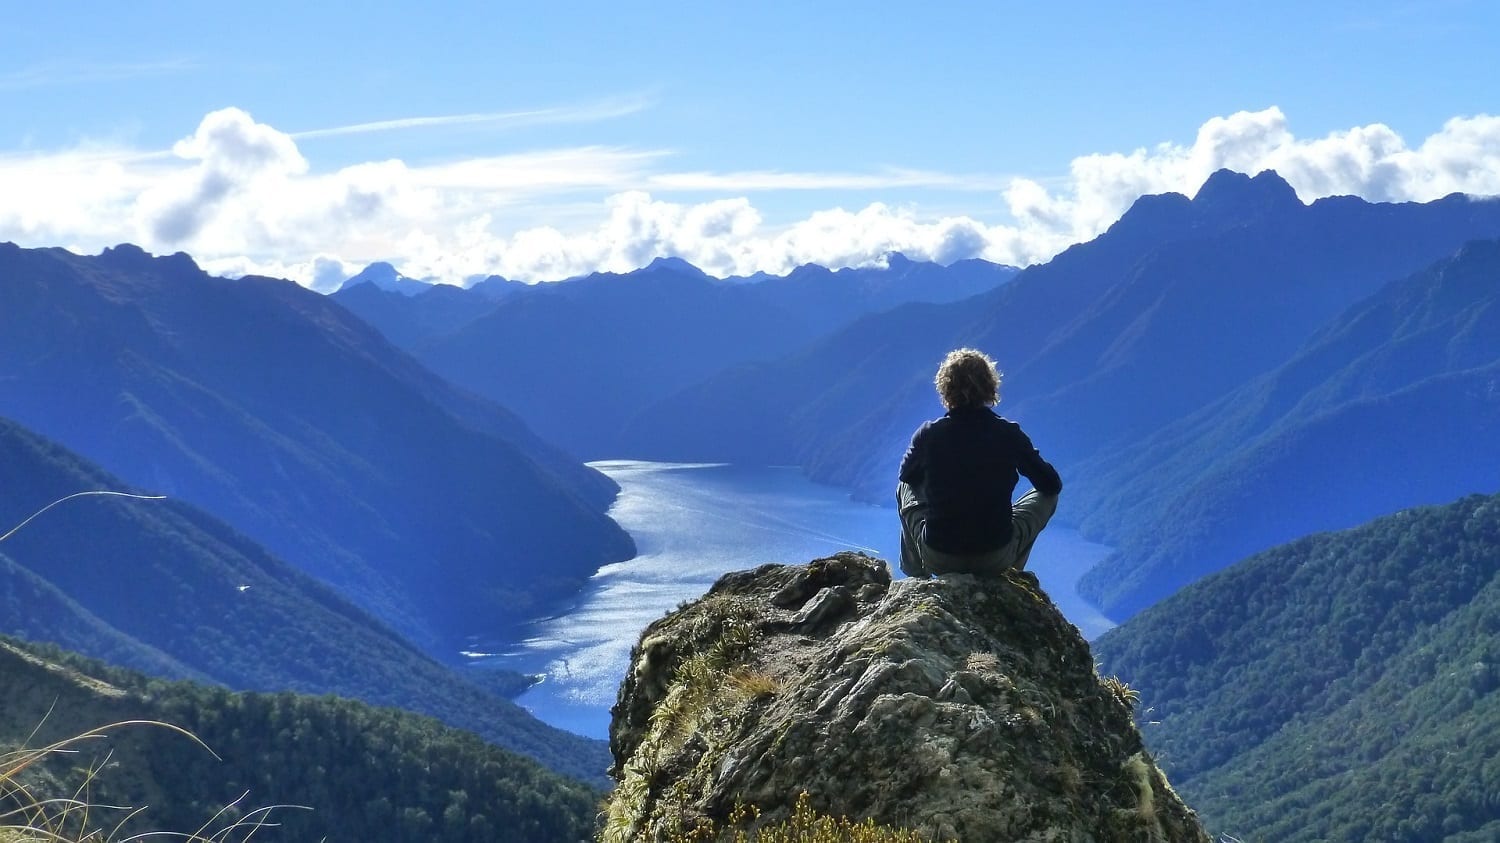 Man sitting at the summit of a hike overlooking Kepler Bay NZ: Image by Gerralt van Soest from Pixabay